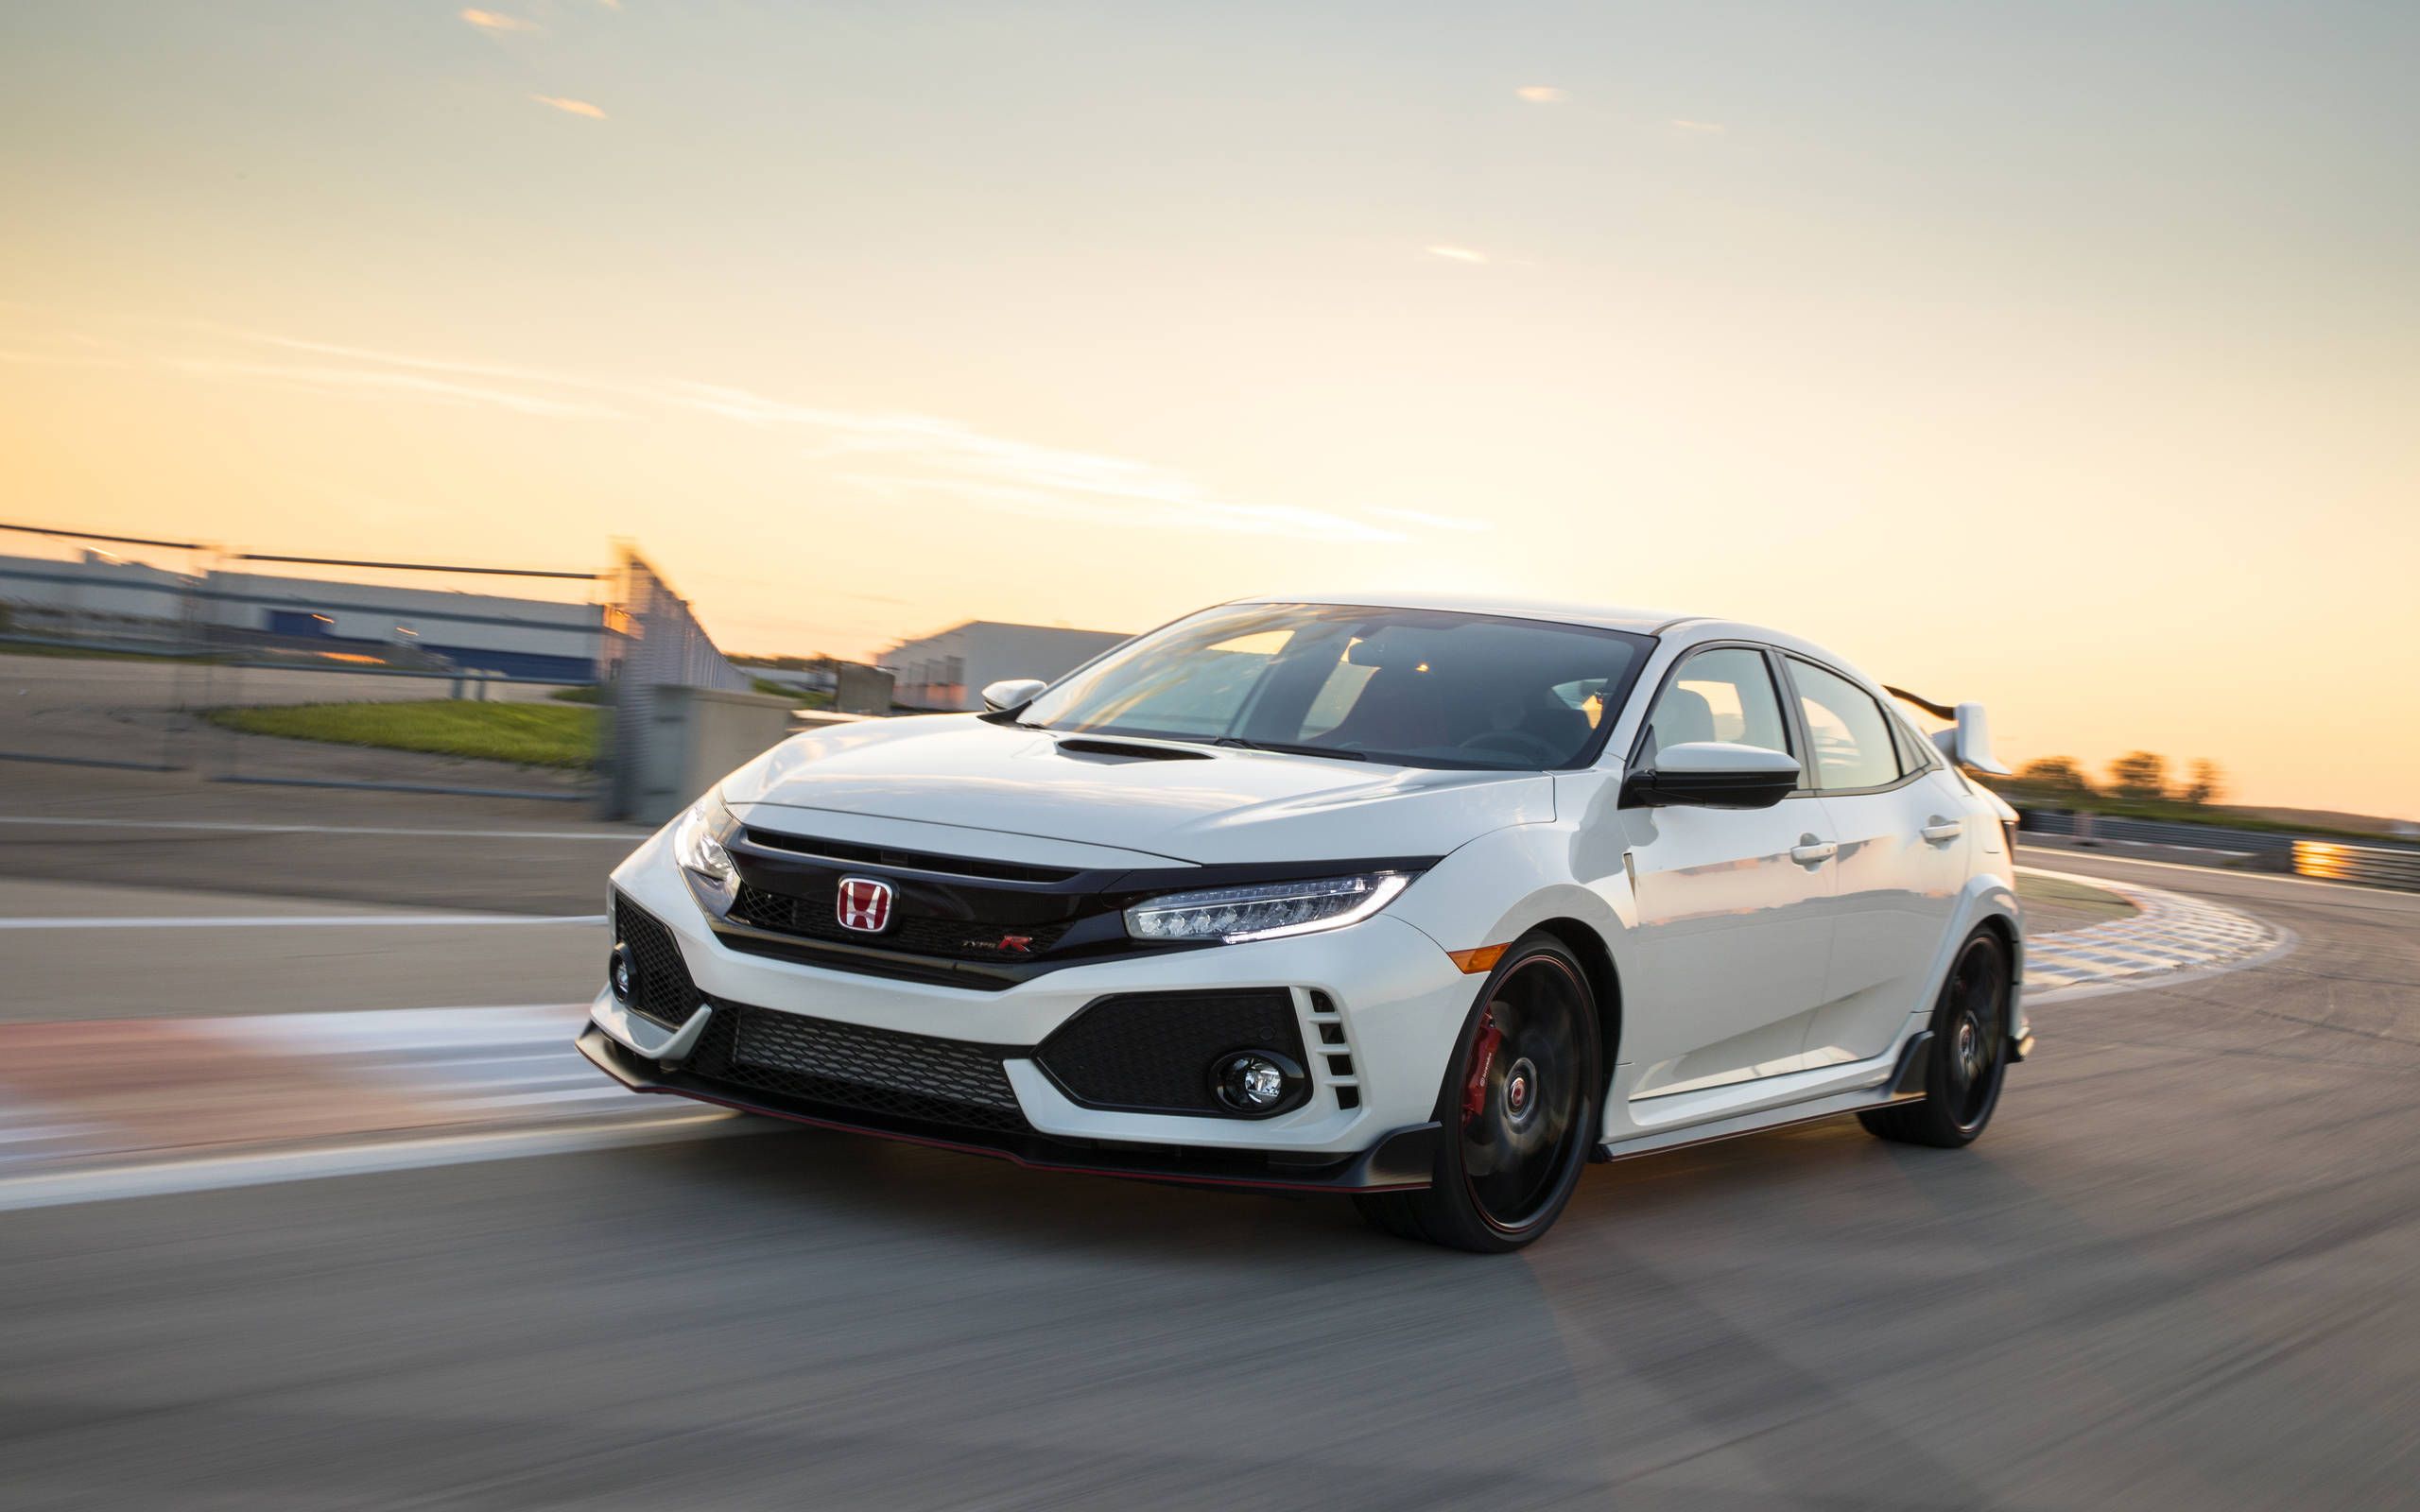 2017 Honda Civic Type R Review: Driving the Most Powerful U.S. Honda Ever